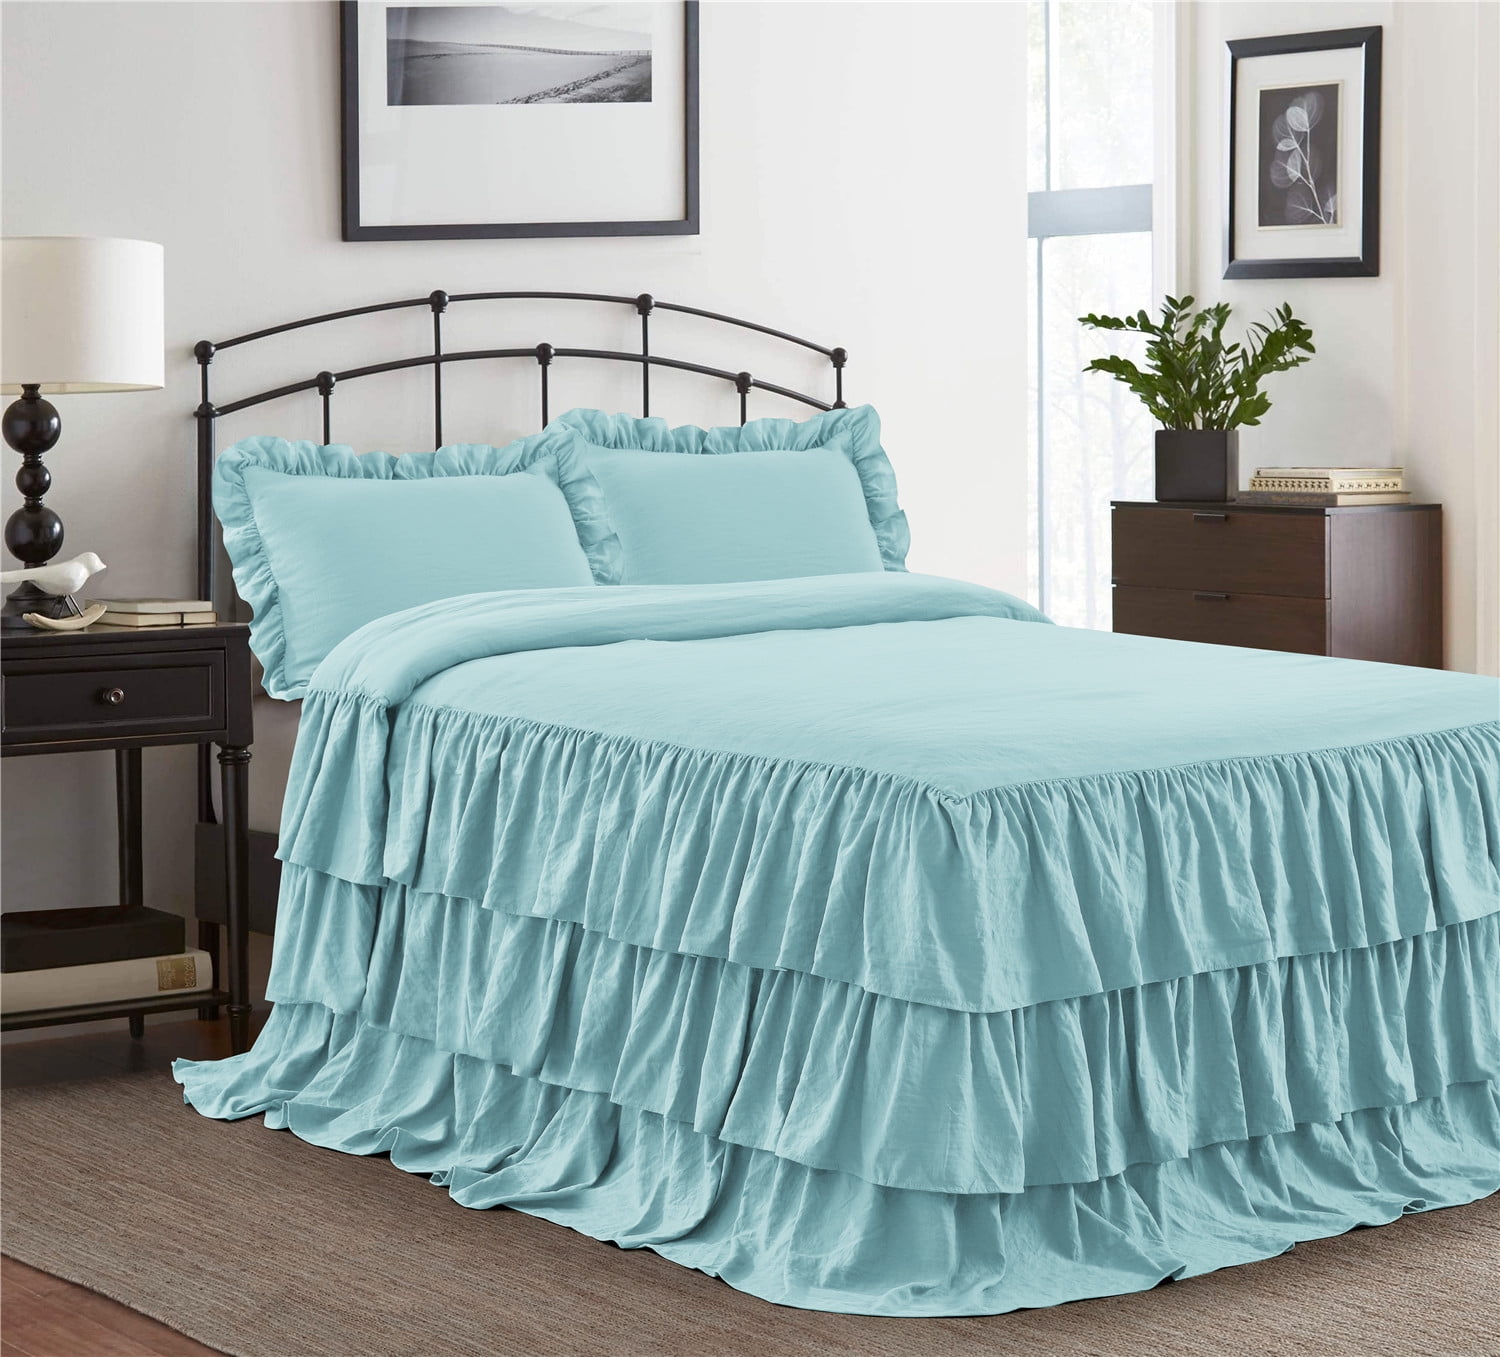 Details about   Quilted Bedspread Ruffles Pillowcase Cotton Quilted Bedskirt Luxury Princess